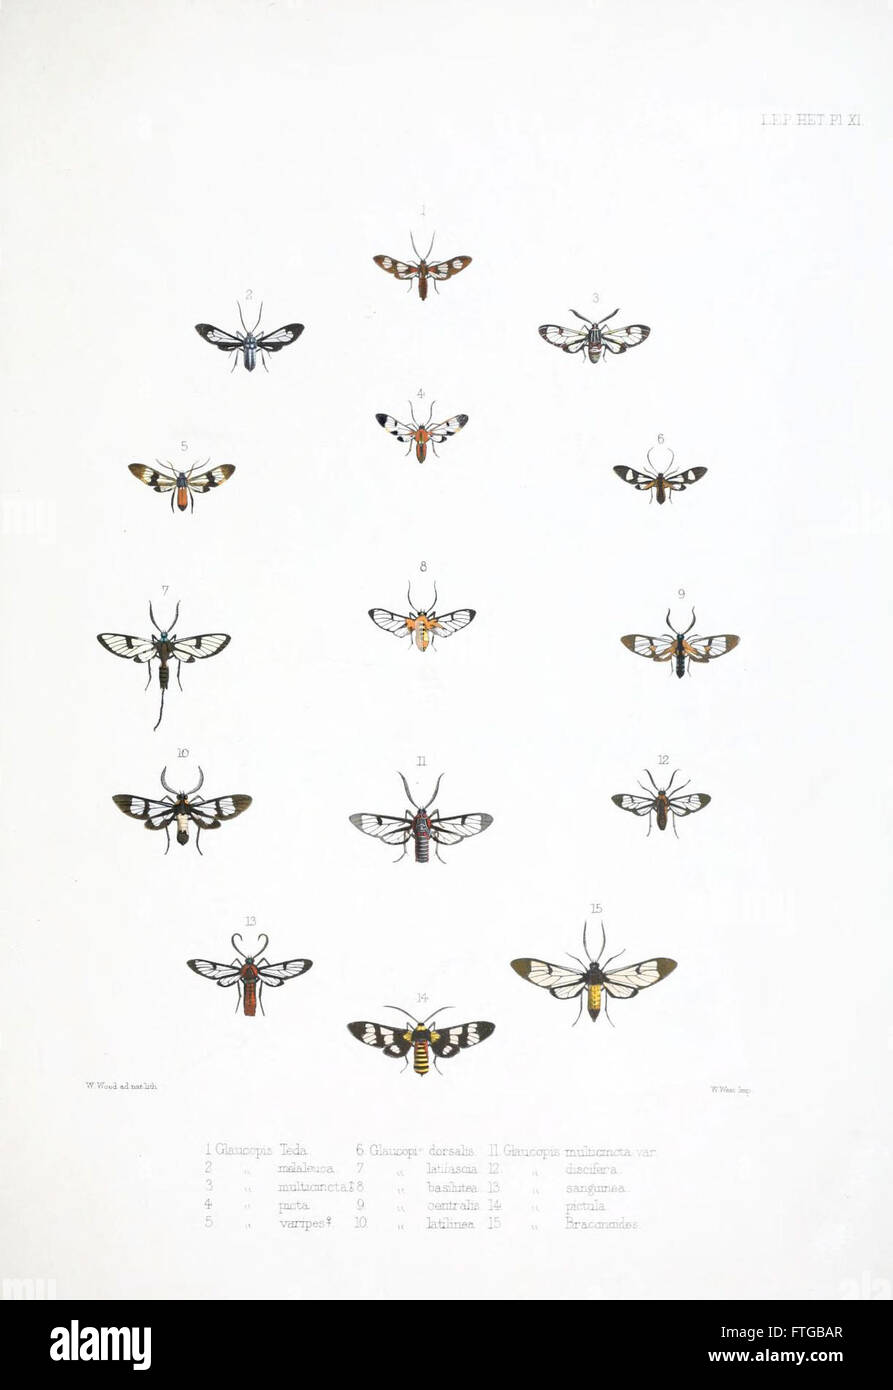 Illustrations of typical specimens of Lepidoptera Heterocera in the collection of the British Museum (Pl. XI) Stock Photo